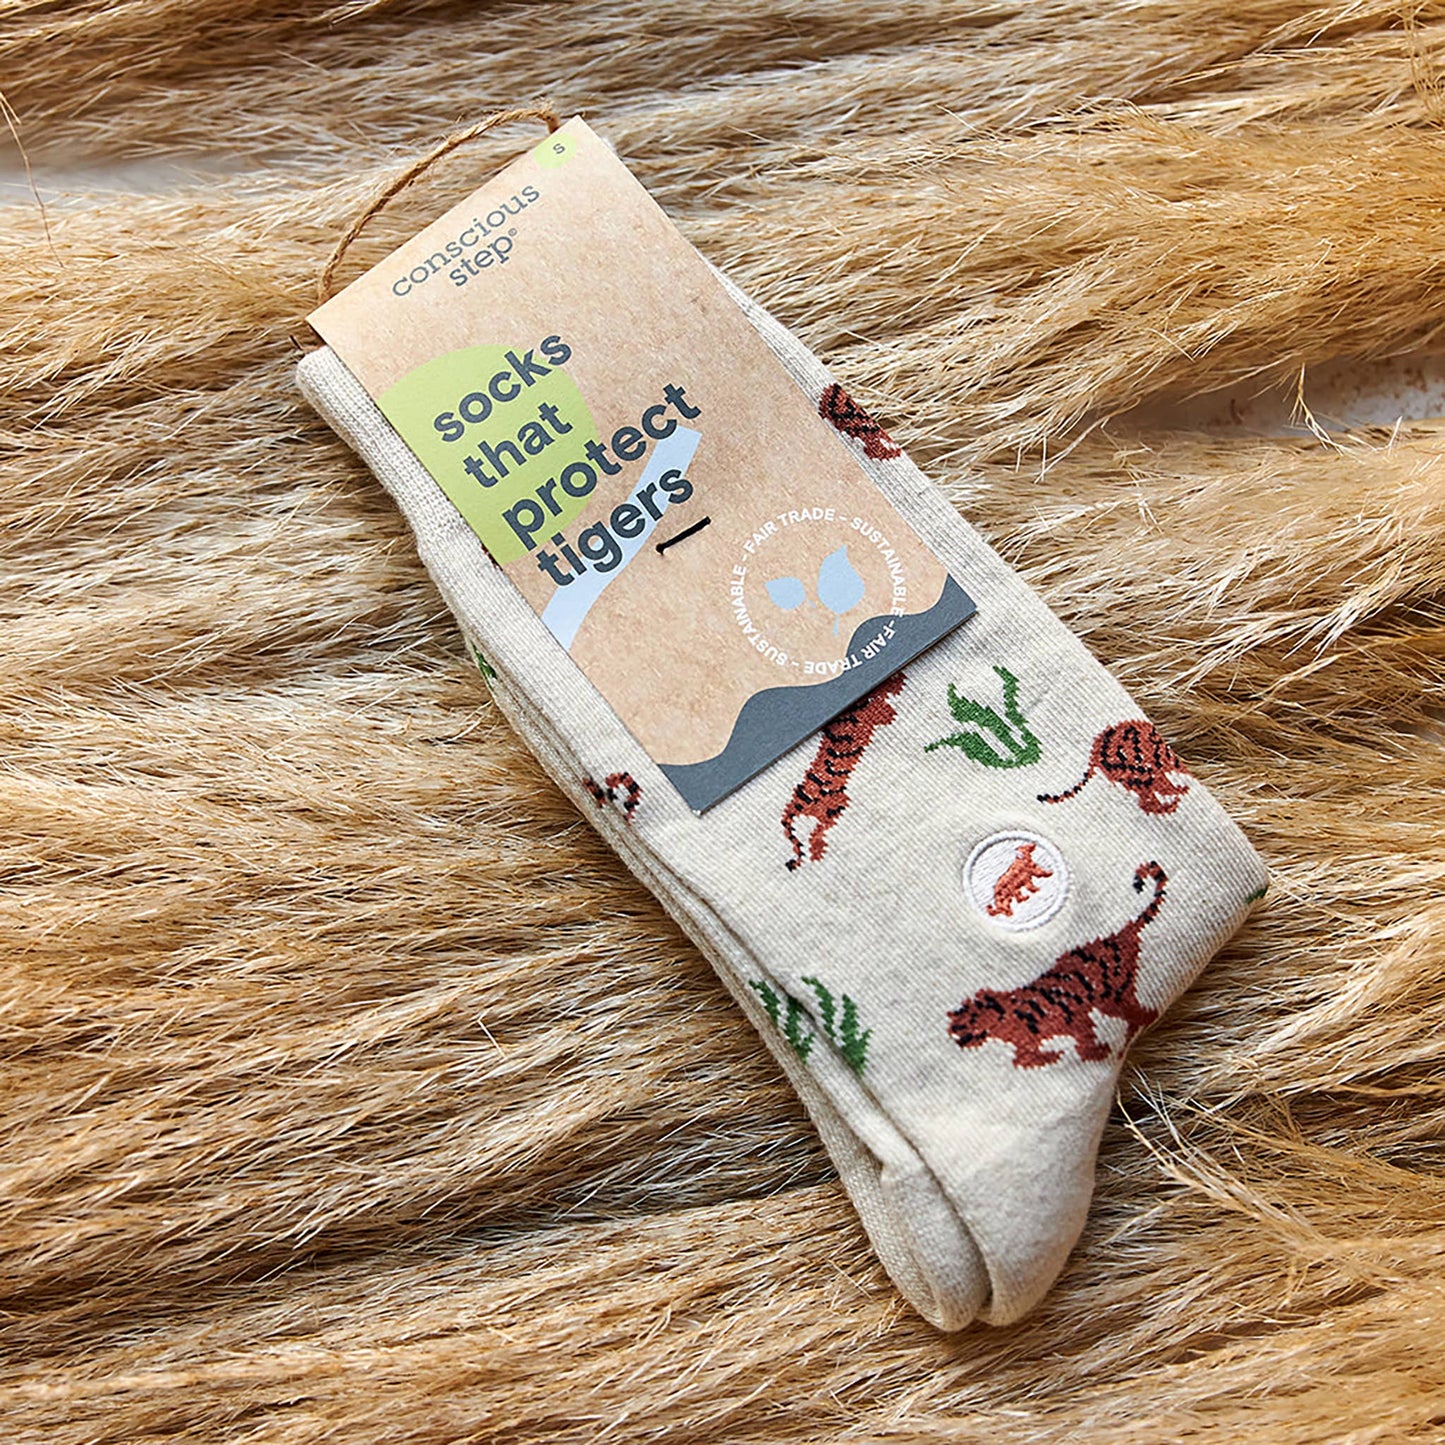 Socks that Protect Tigers: Small